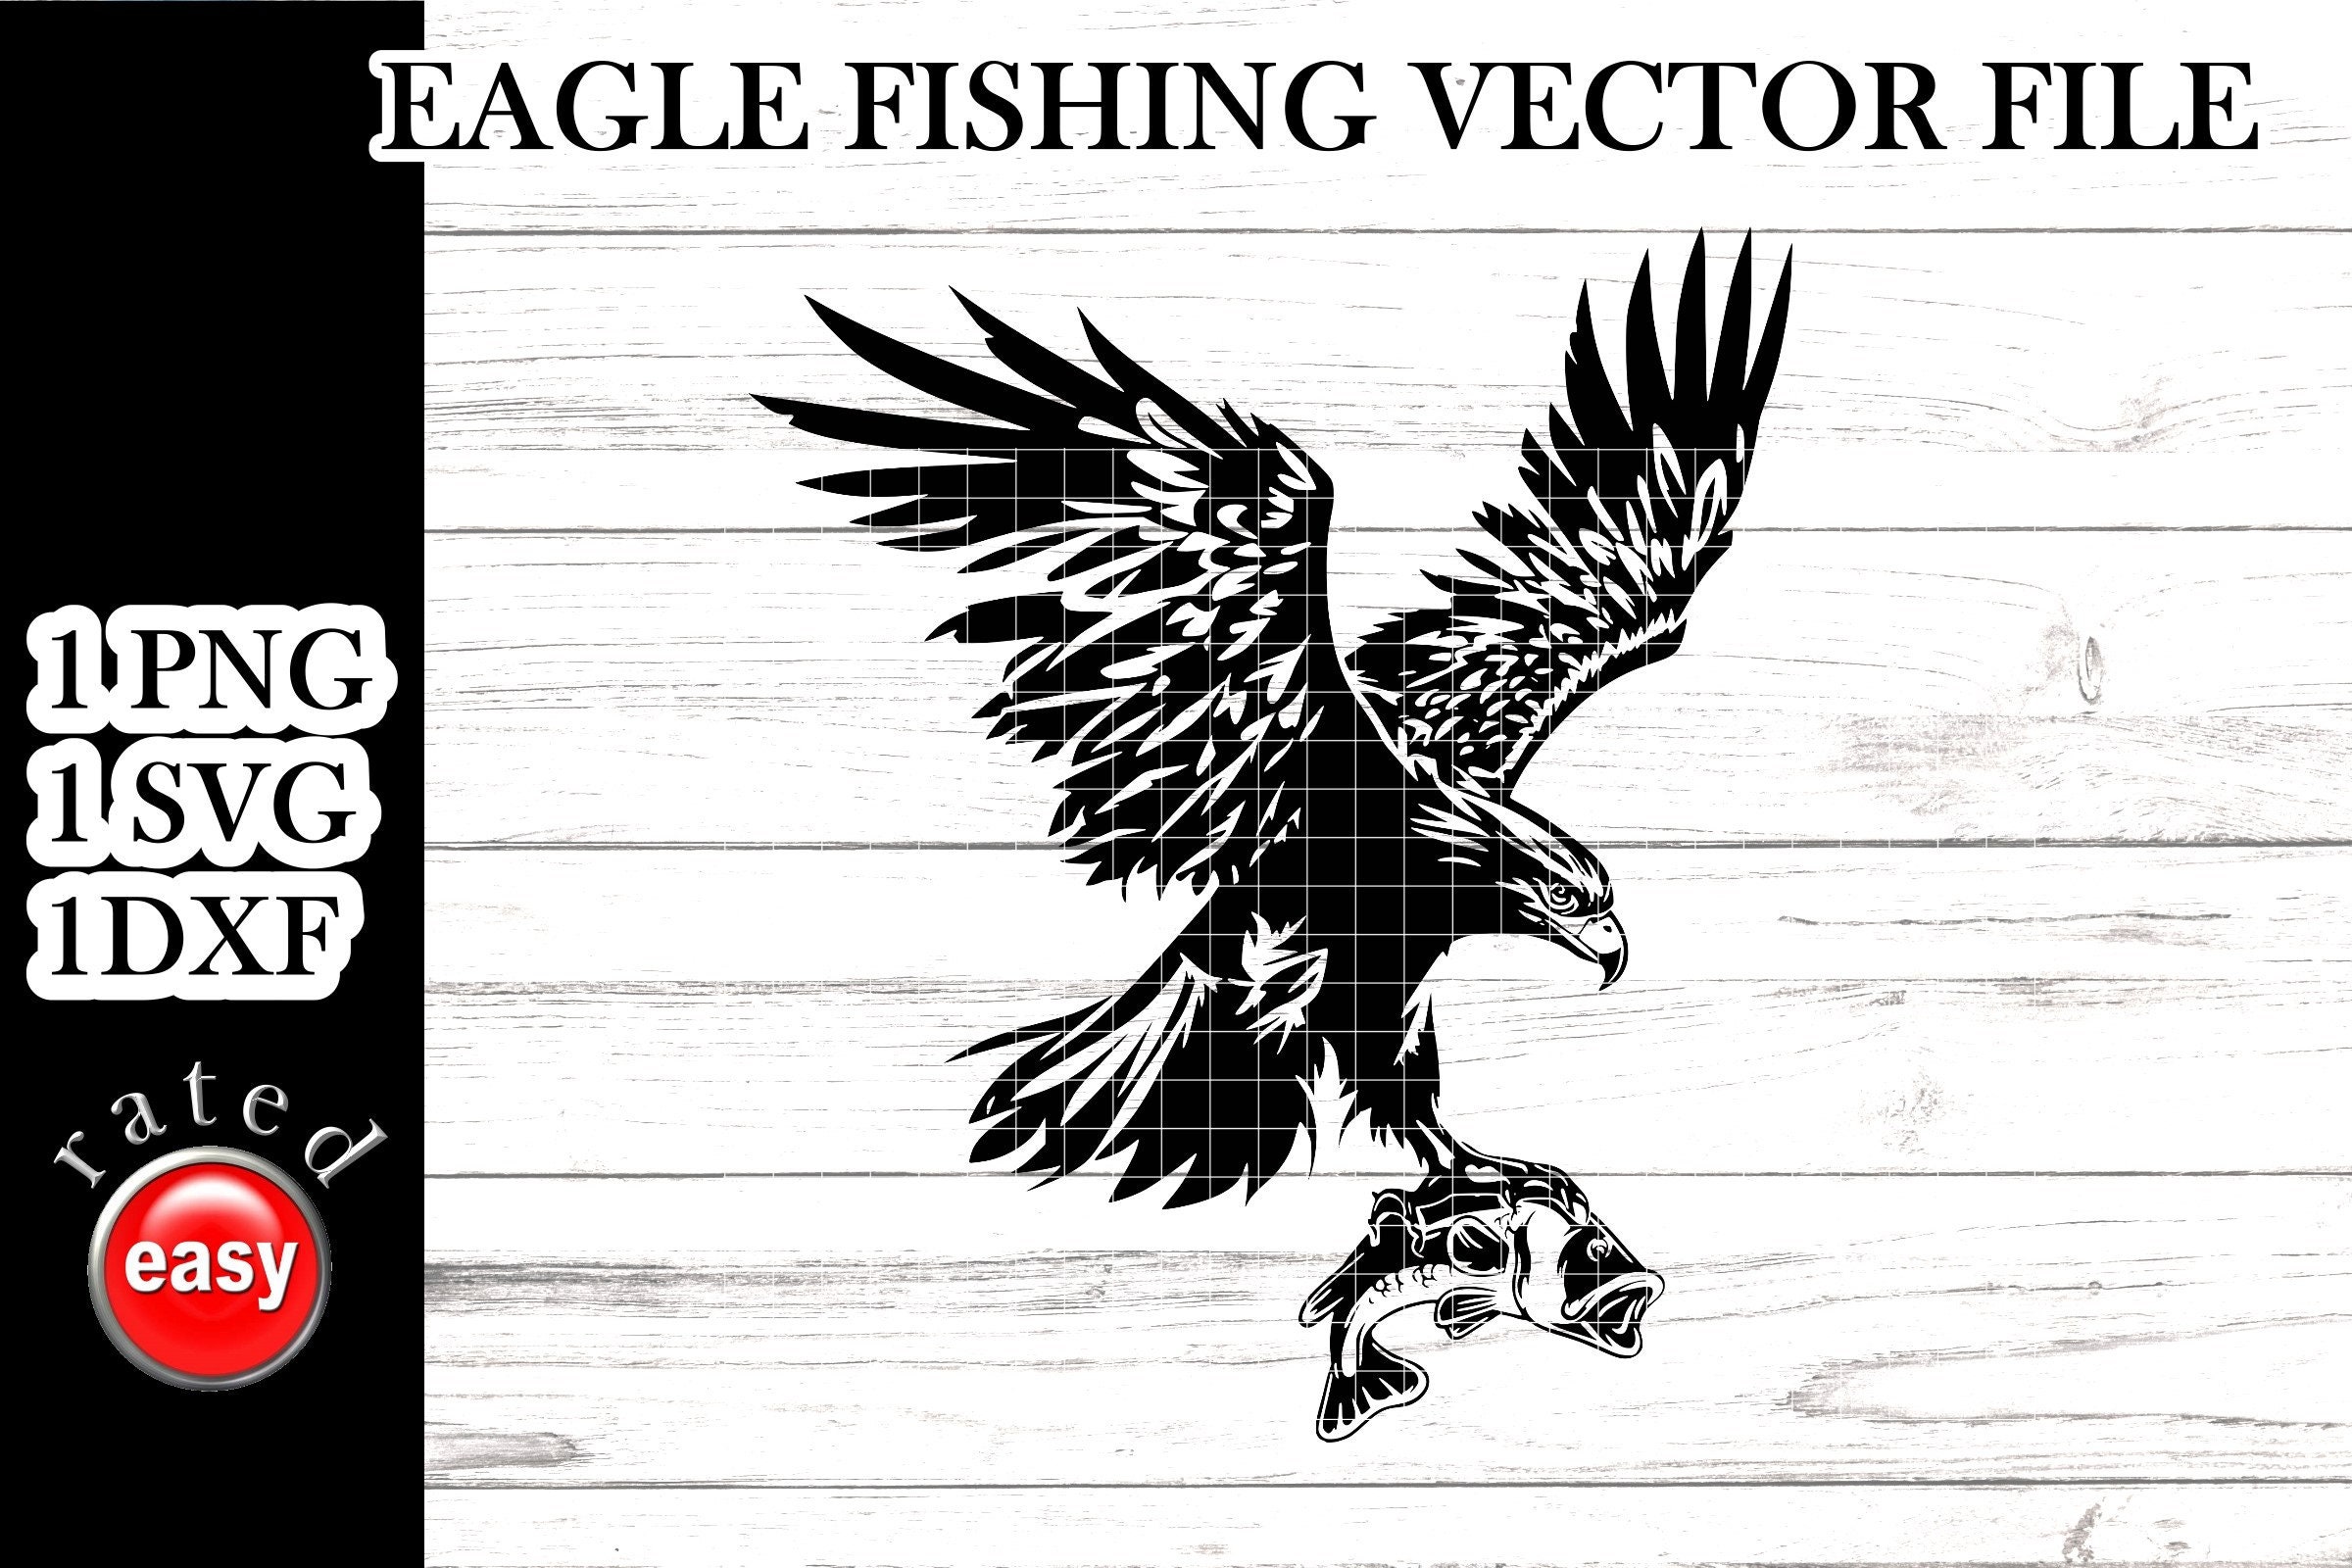 Eagle Svg Fishing Eagle Svg Eagle DXF Fishing Eagle Dxf Eagle Cutting File  3 File Types Included 